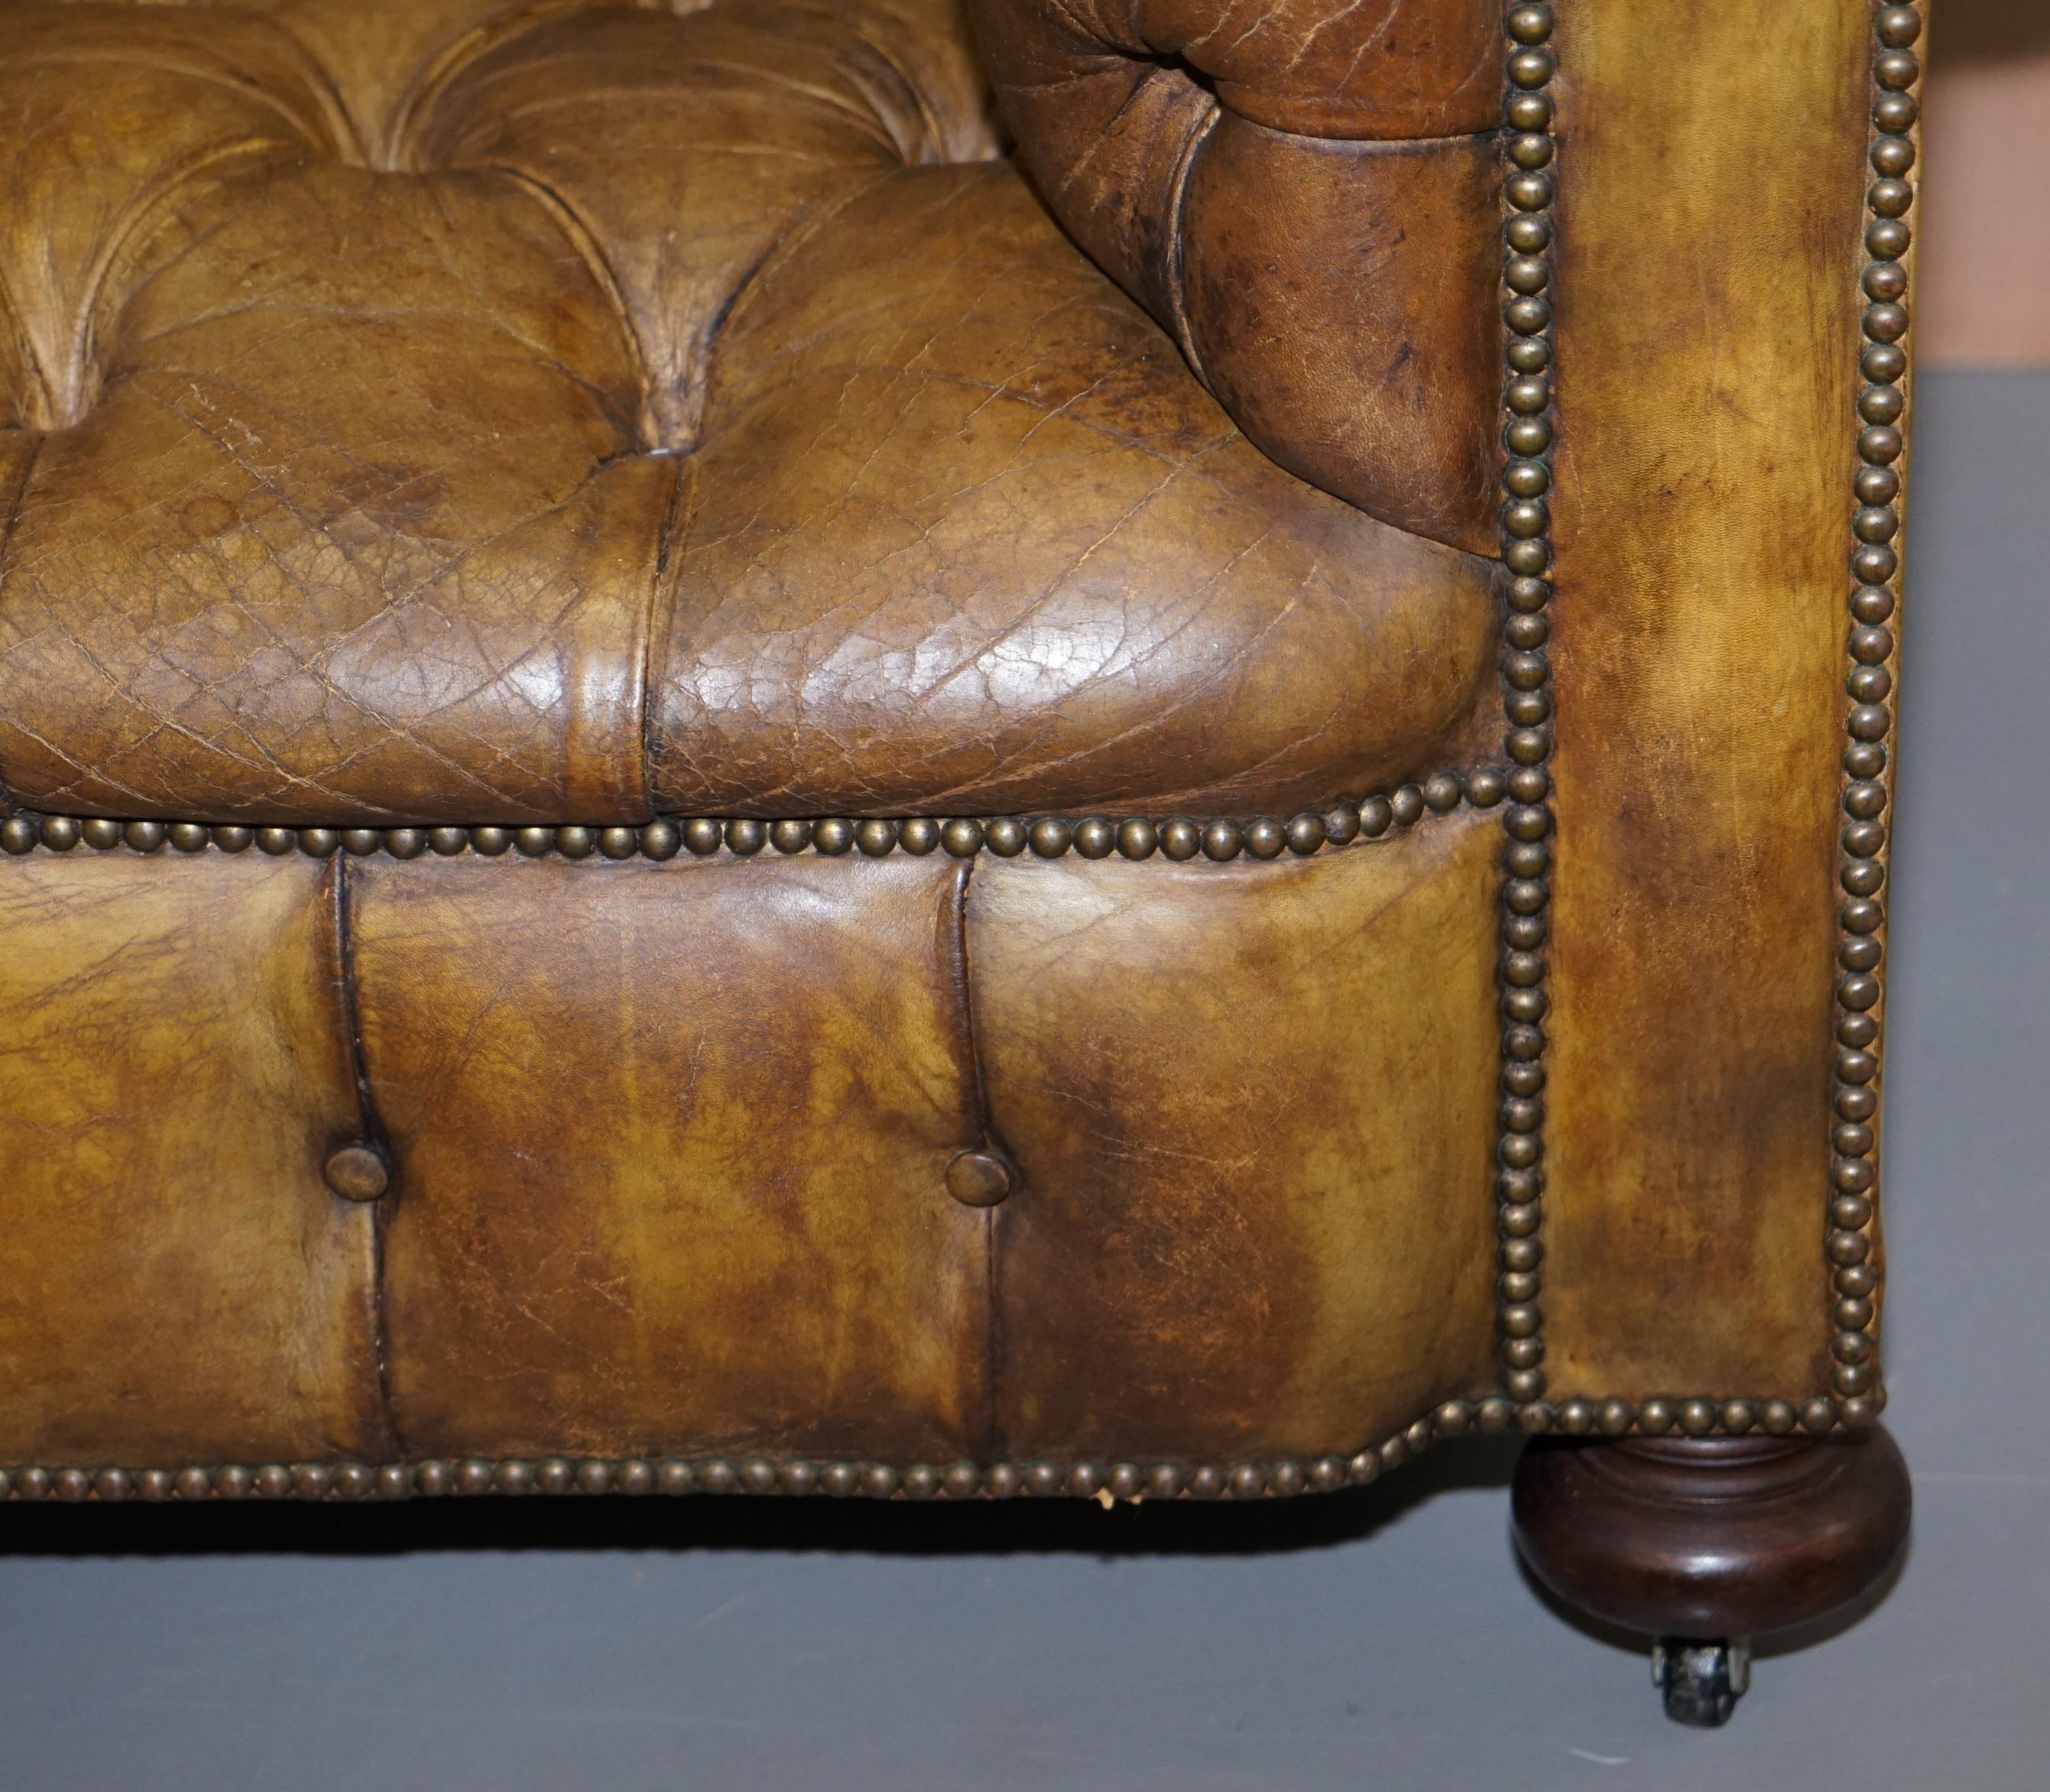 Rare circa 1900 Fully Buttoned Chesterfield Sofa Original Leather Upholstery 6